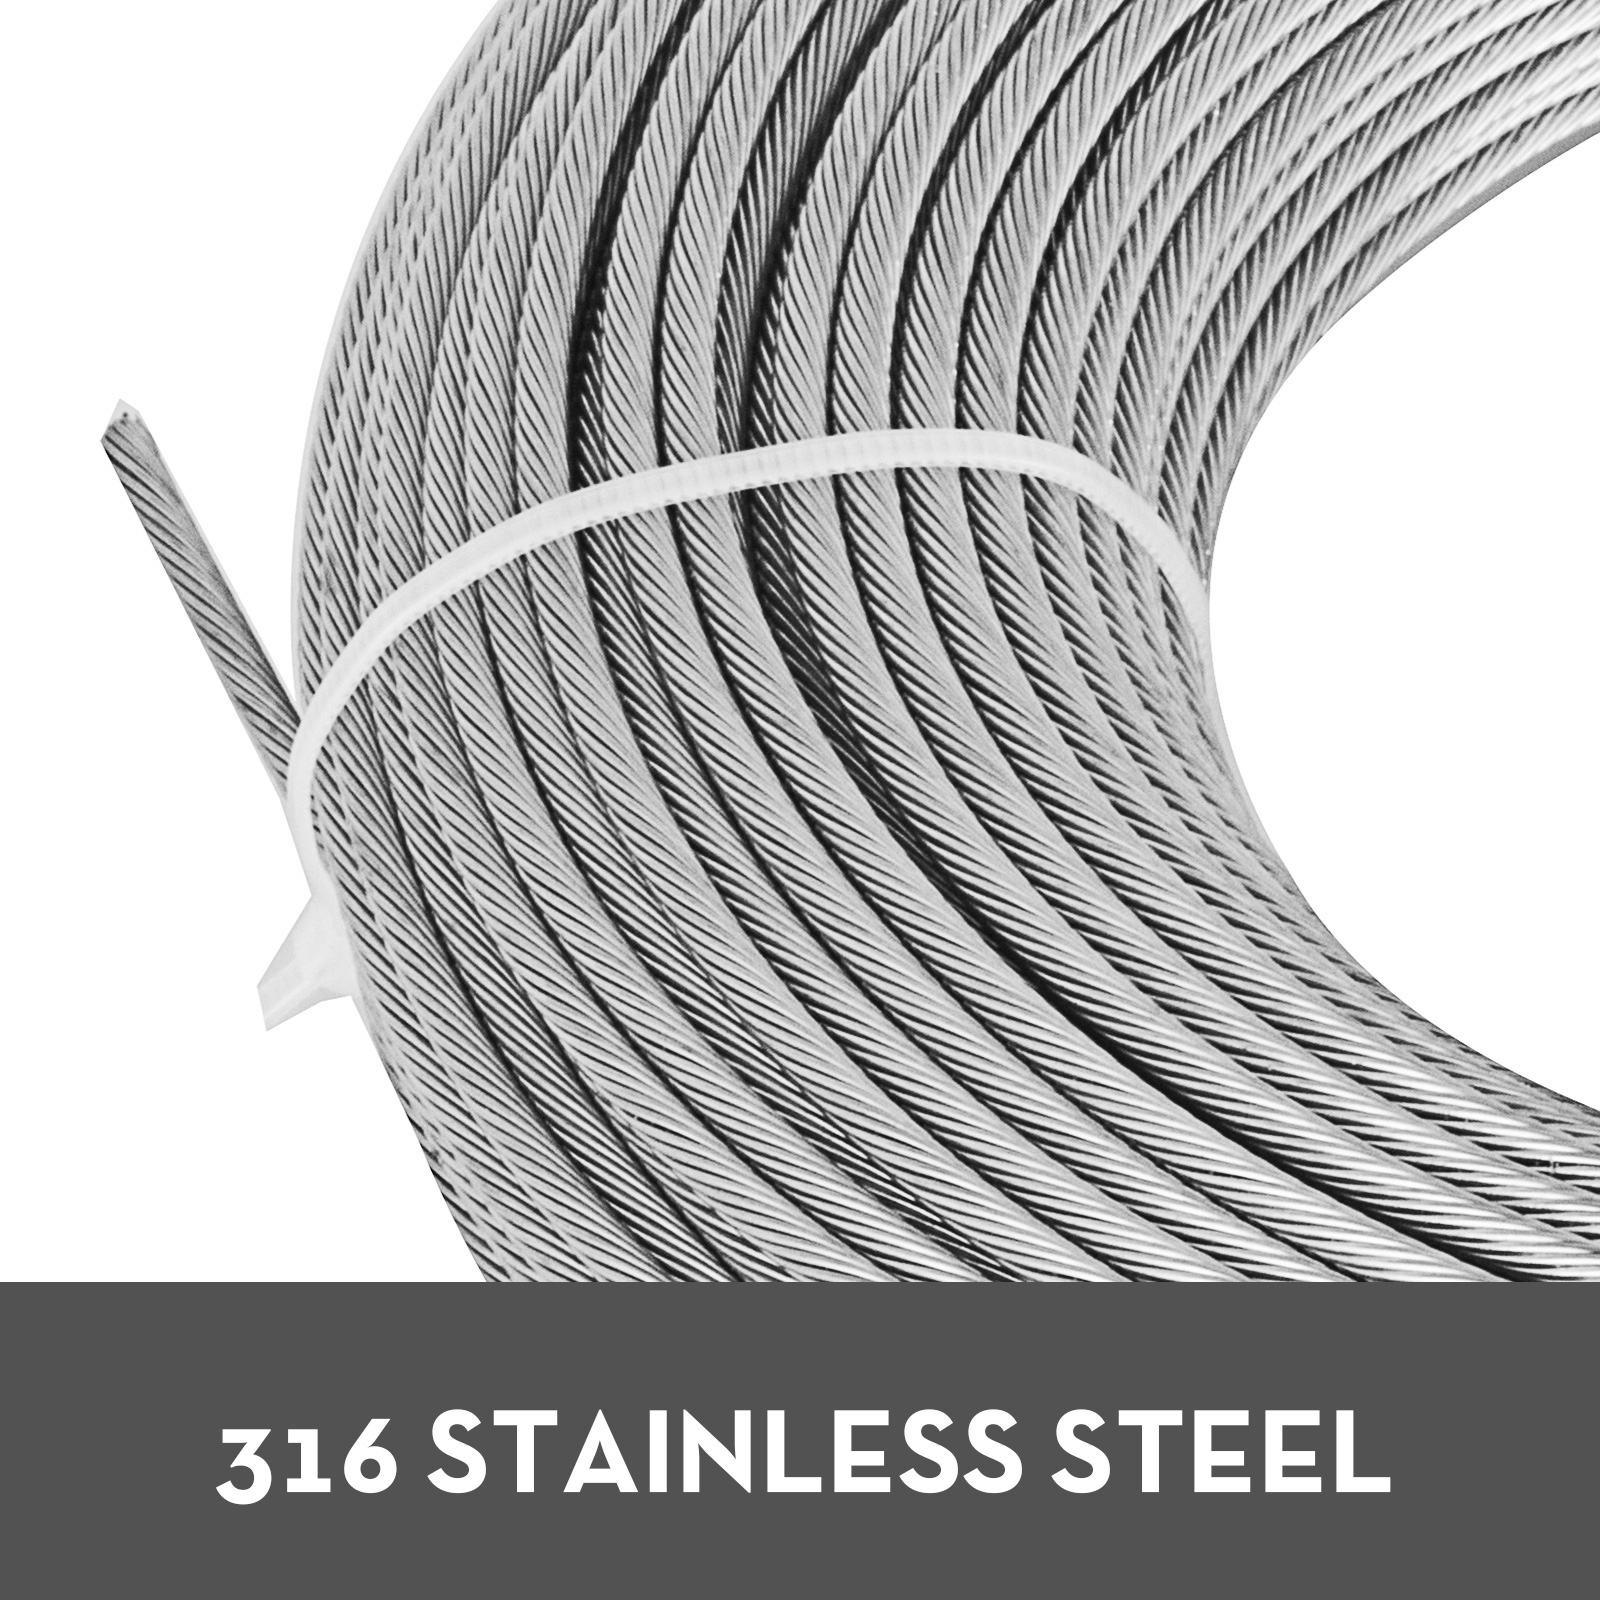 Stainless Steel Type 316 Wire Rope 7x7 100-1000FT Lifting Business Stainless